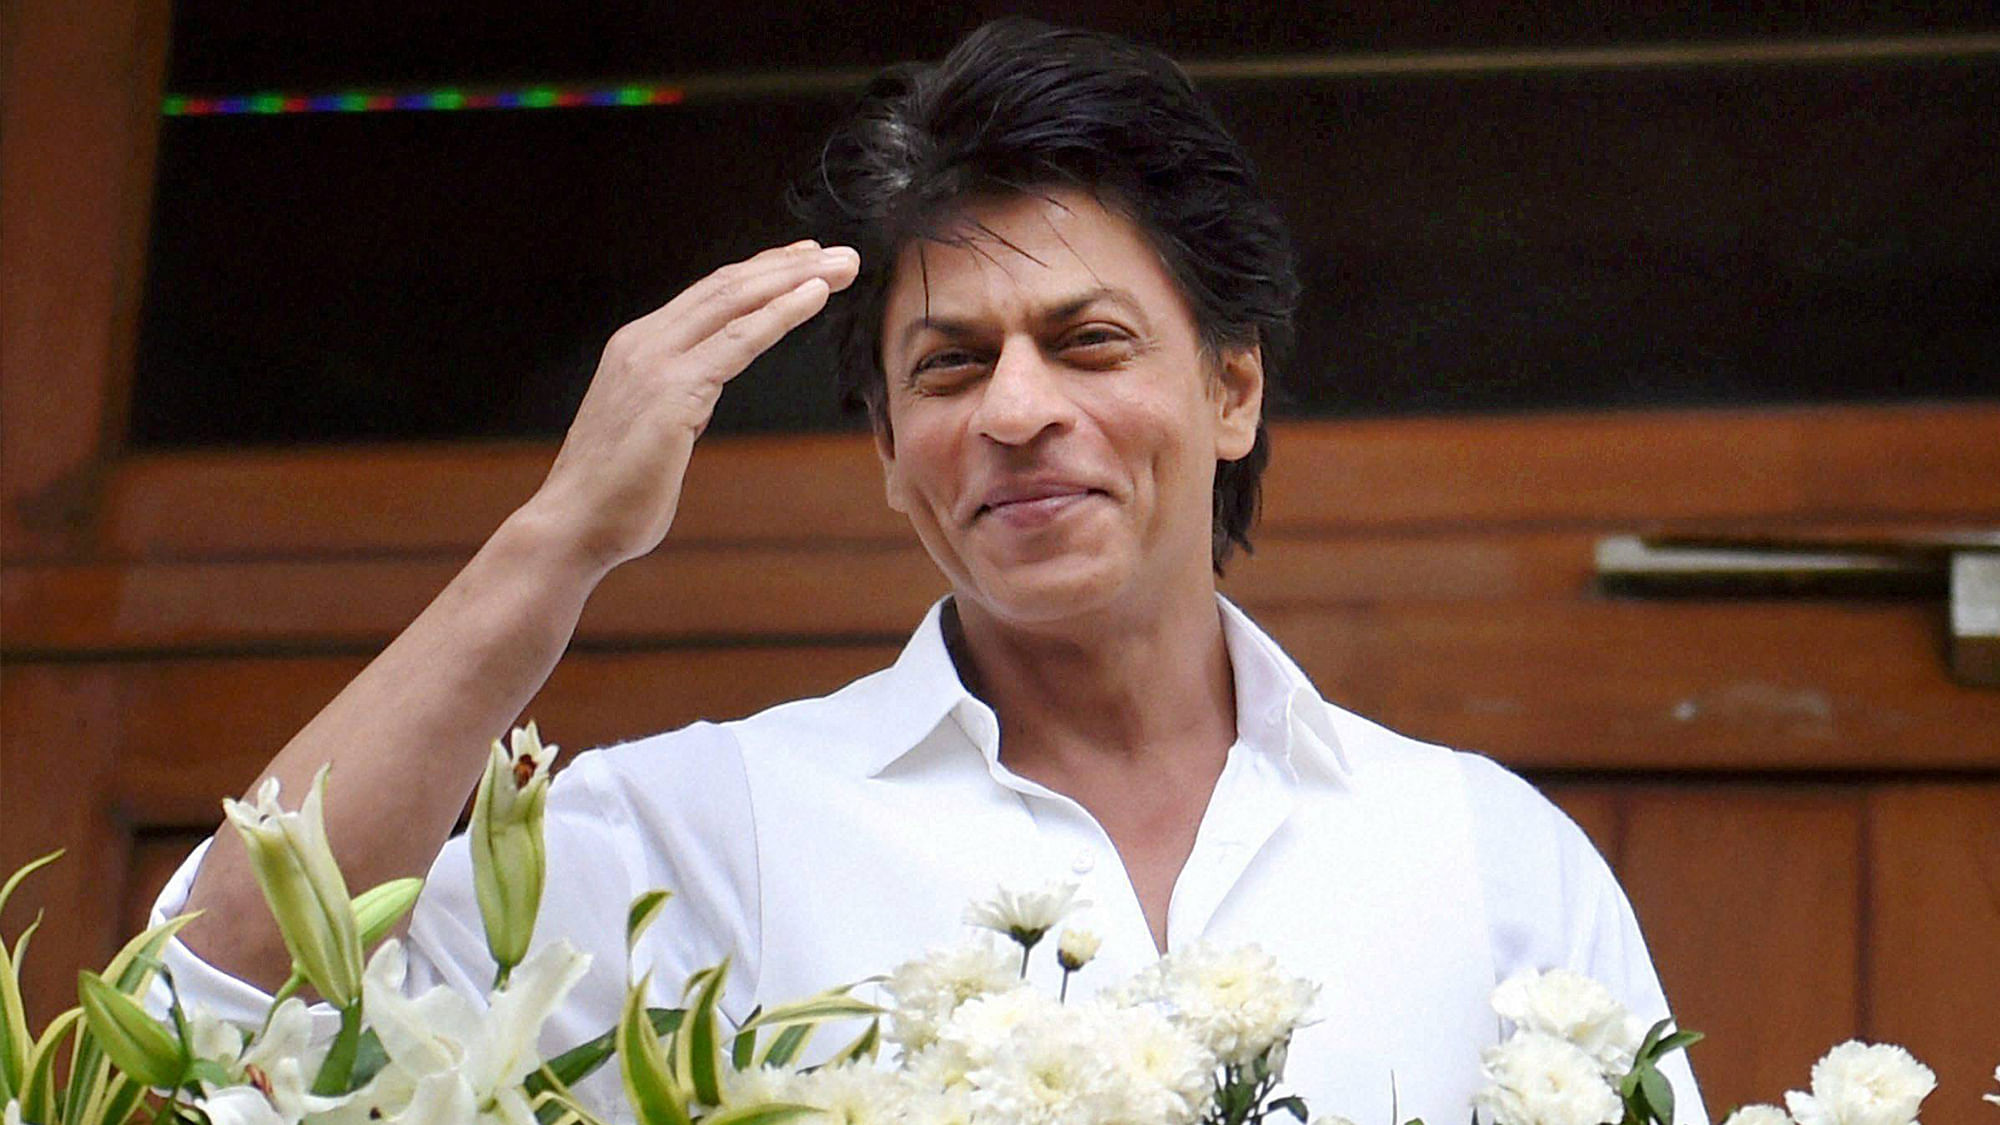 Actor Shah Rukh Khan waves to his fans. (Photo: PTI)